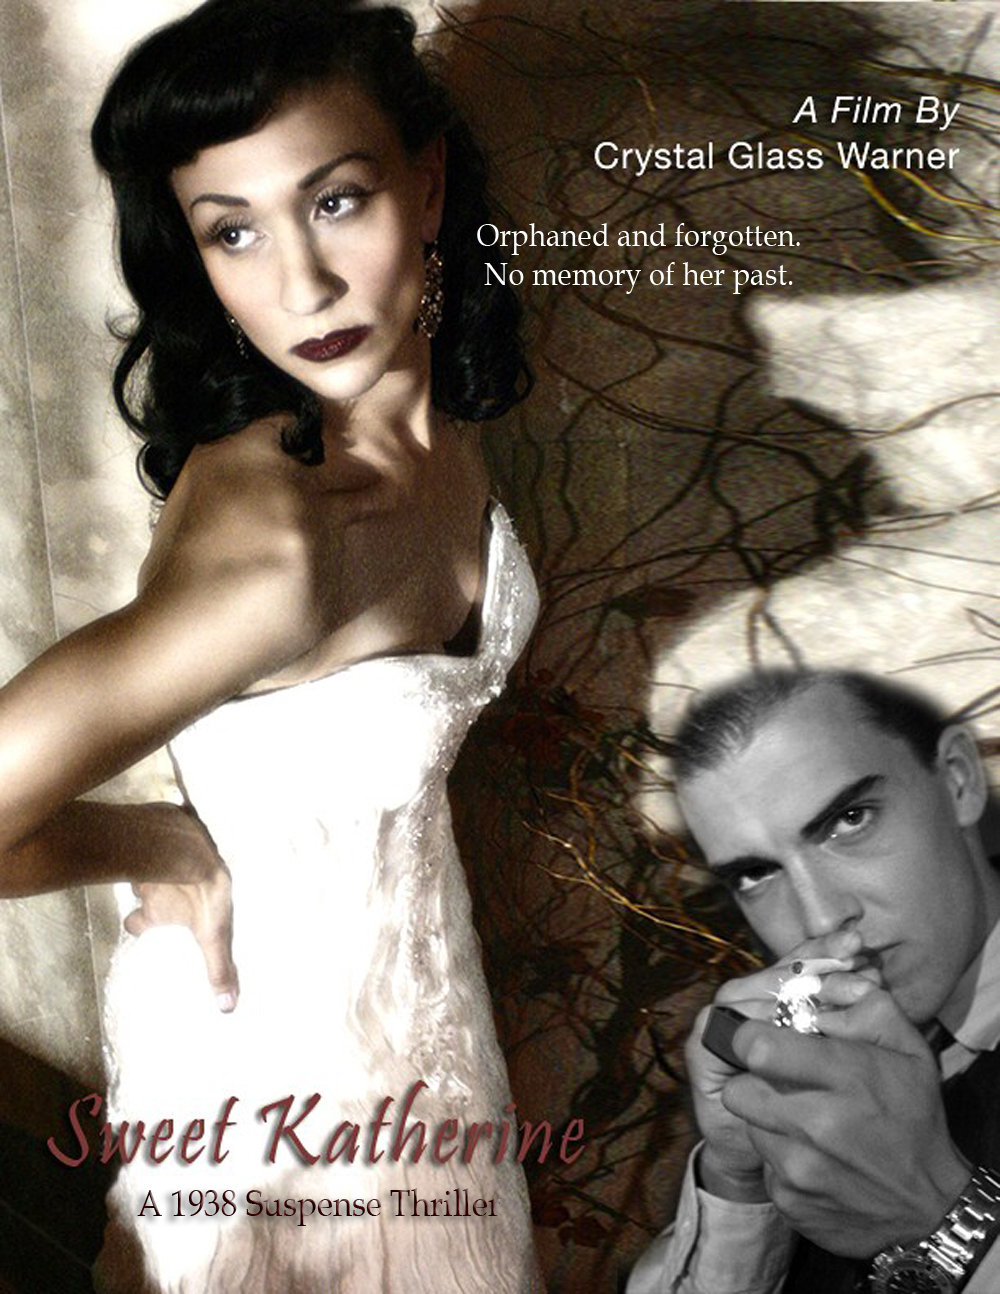 Katherines dreams of Mr. Grant turns to reality. A private eye investigating her past finds a dark secret.